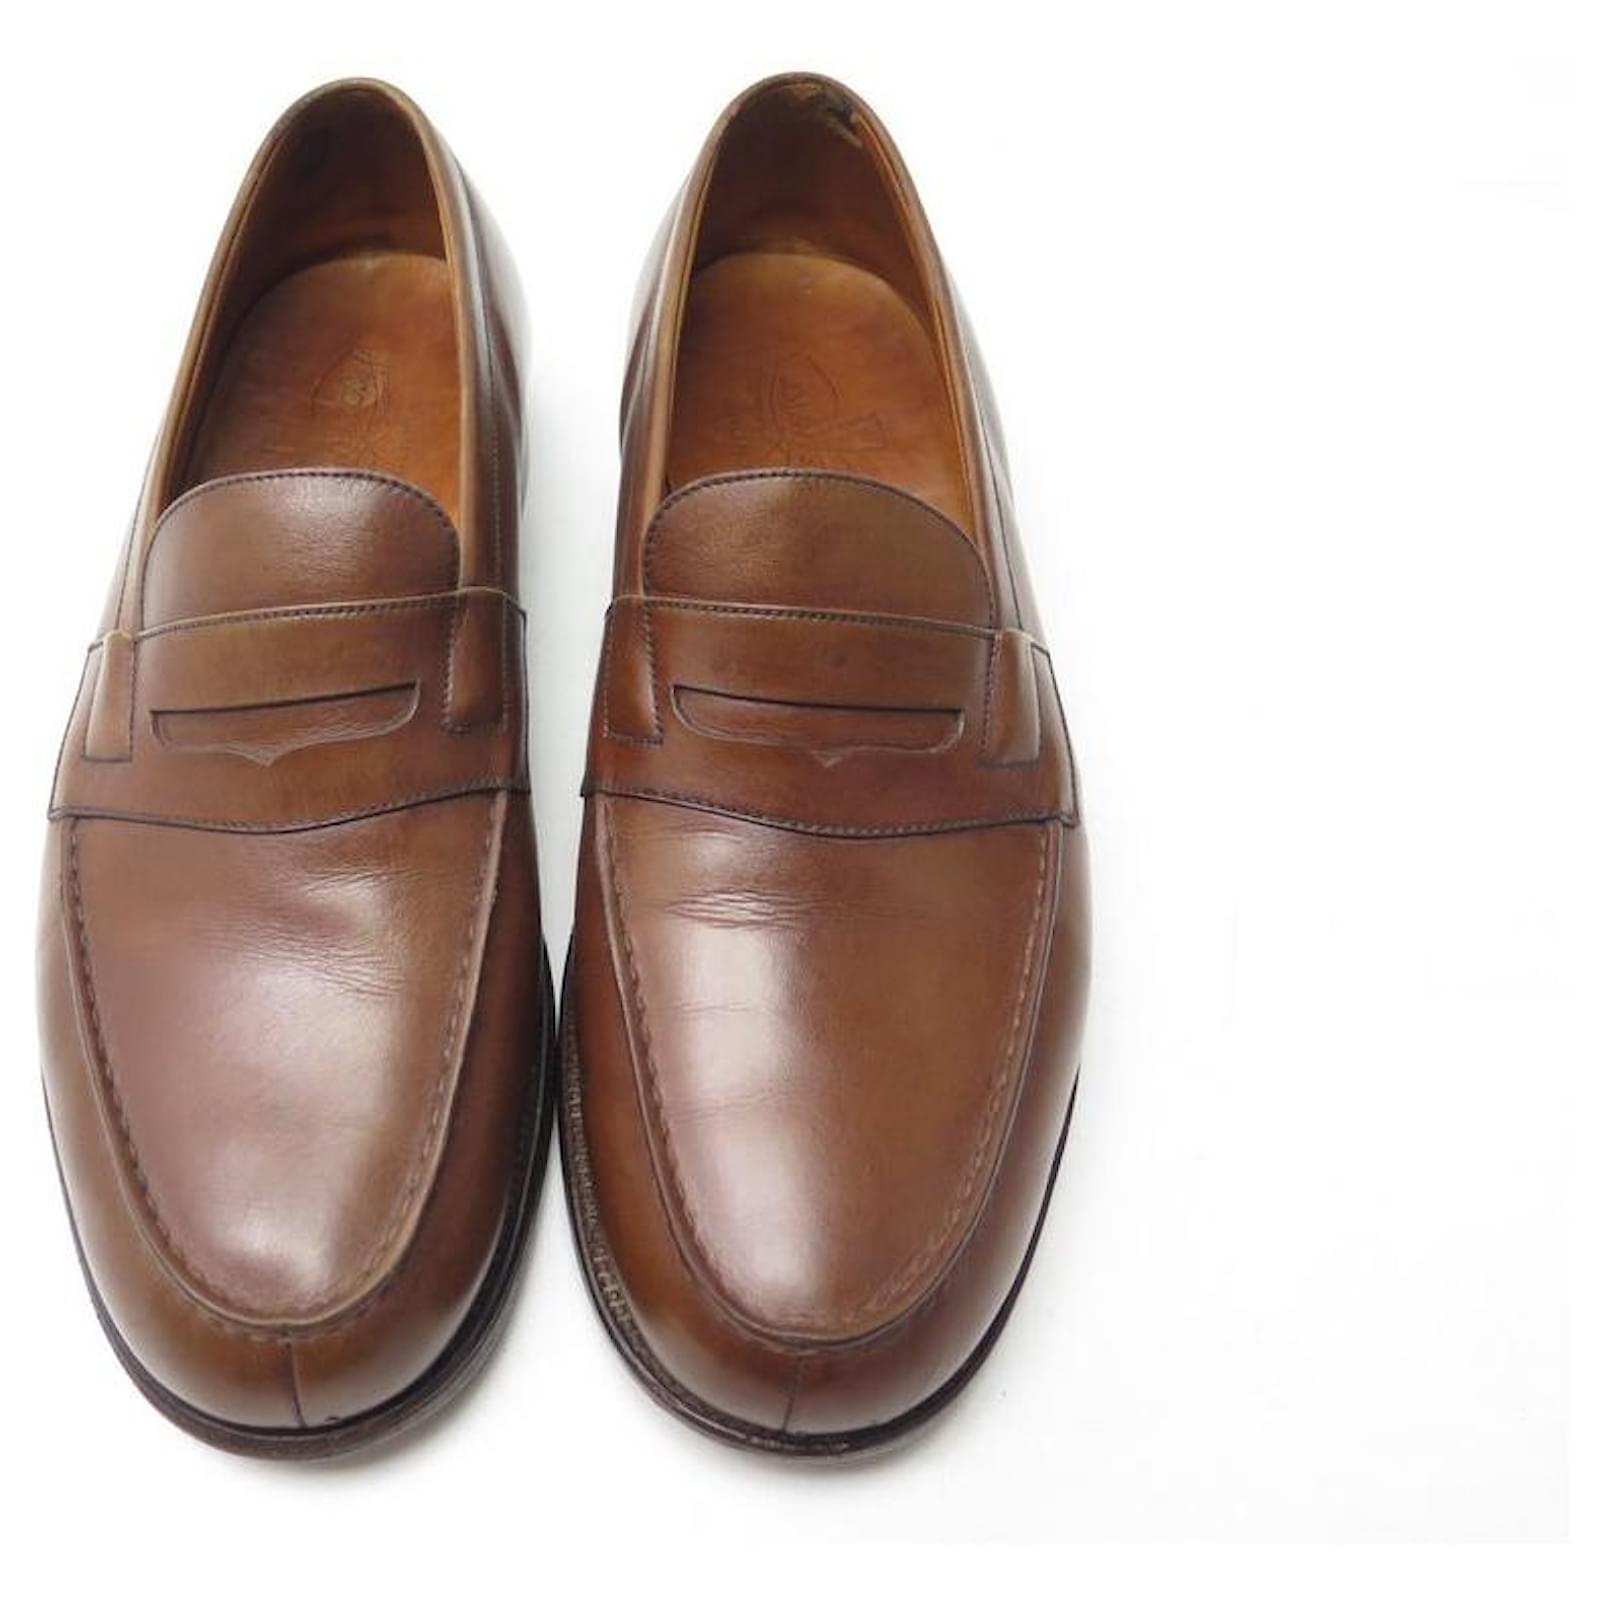 JM WESTON LOAFERS 180 8E 42 LARGE BROWN LEATHER LOAFERS SHOES ref ...